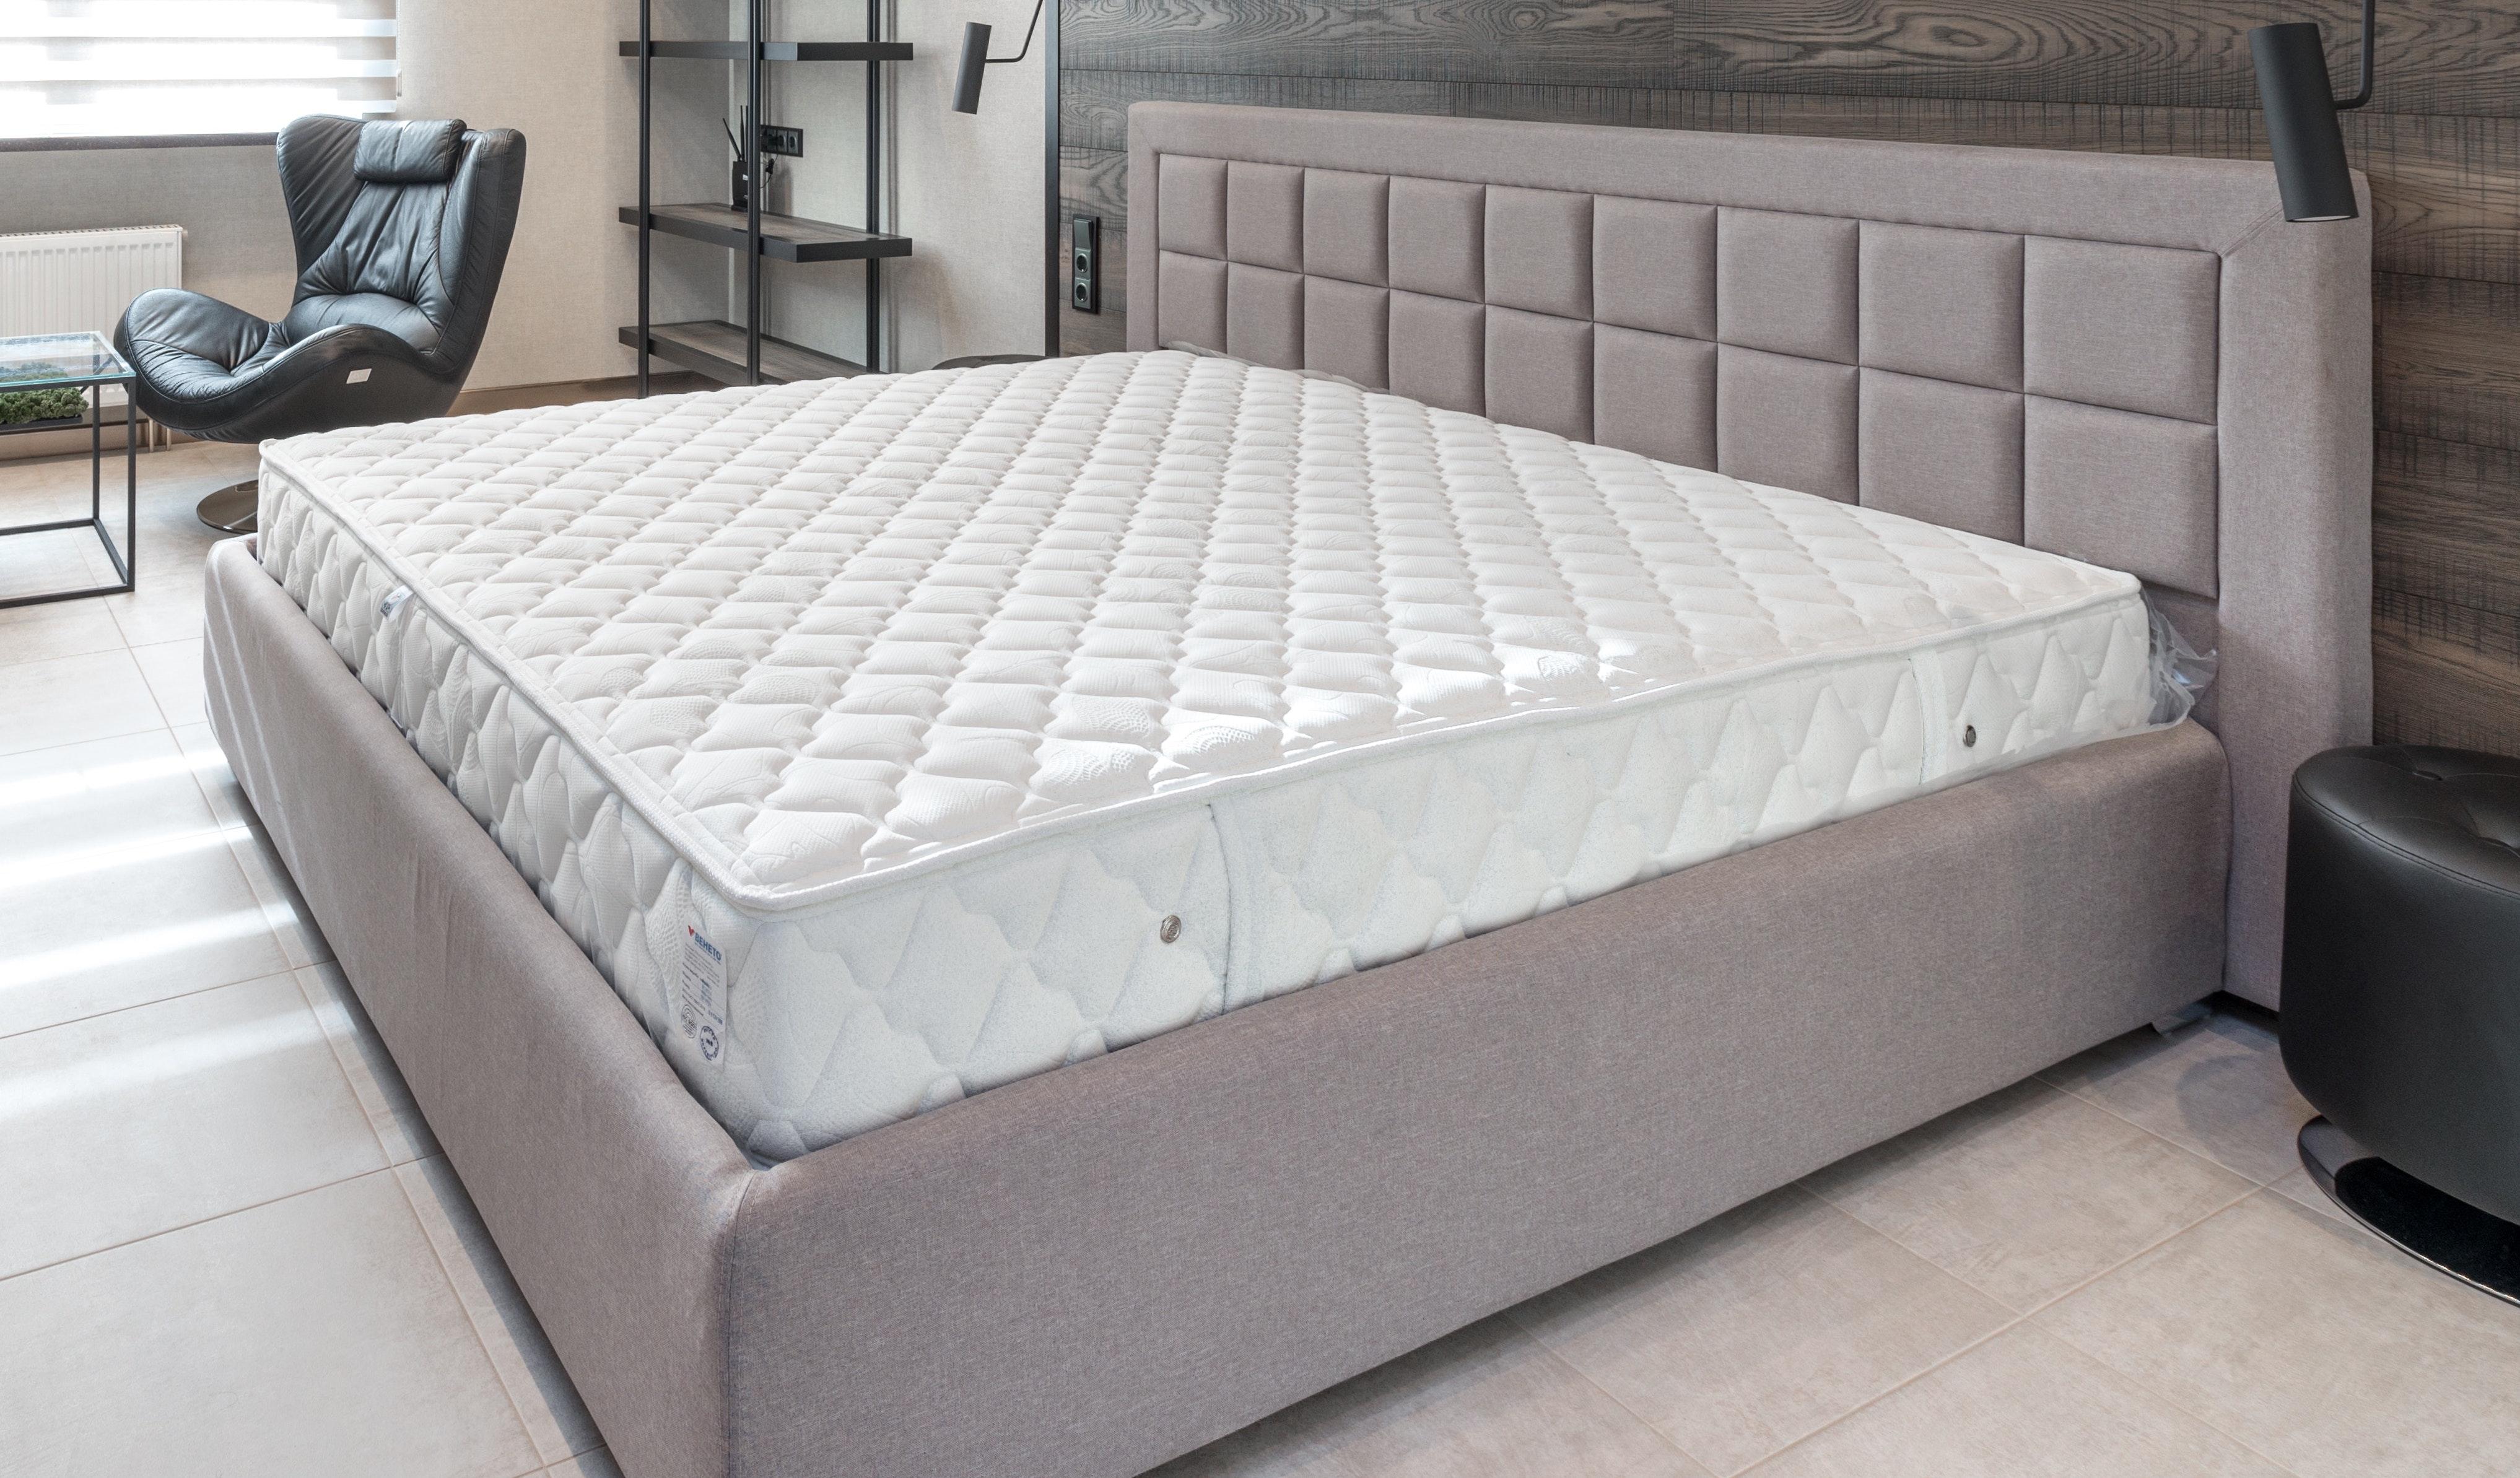 A mattress in a cushioned bed frame